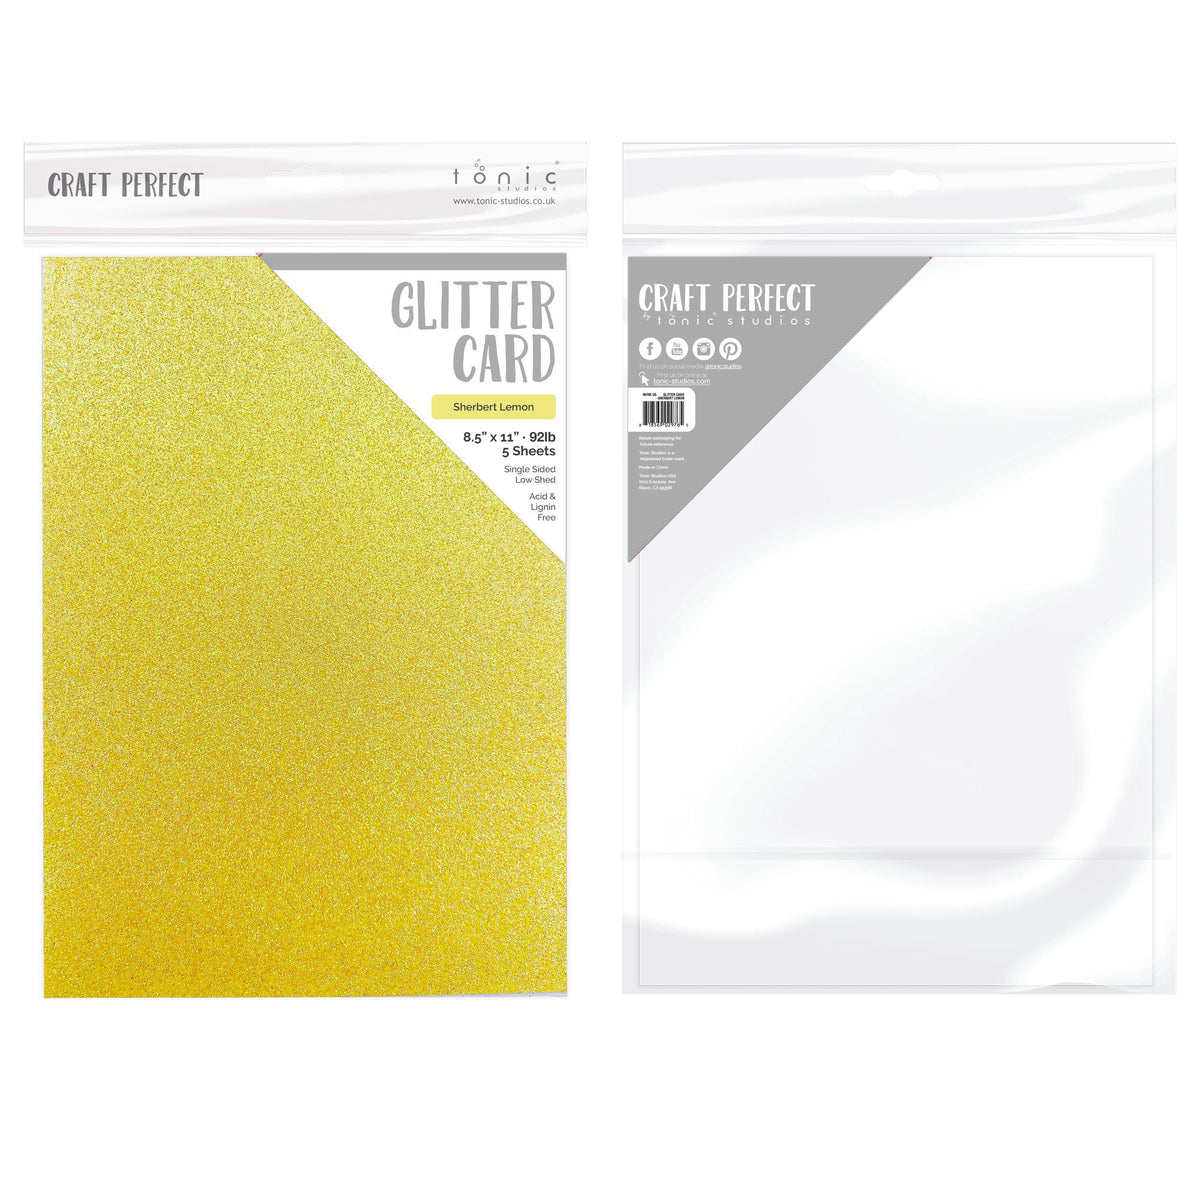 Gold Glitter Cardstock - Double-Sided, No-Shed Glitter, 100 Sheets, 8.5x11